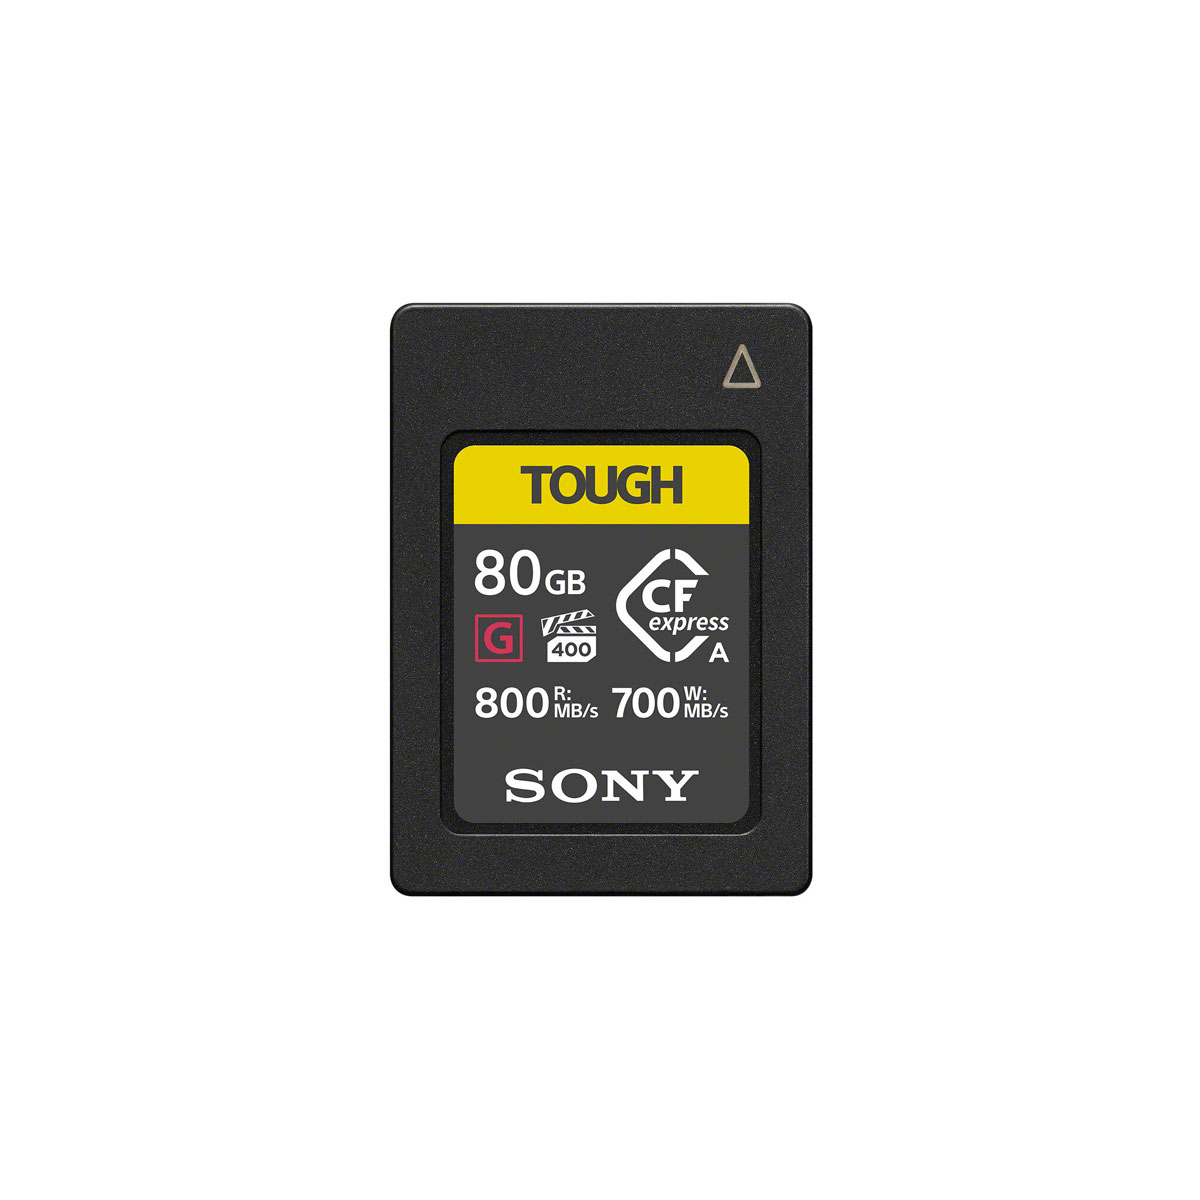 Sony 80GB CFexpress Type A TOUGH Memory Card - The Camera Exchange